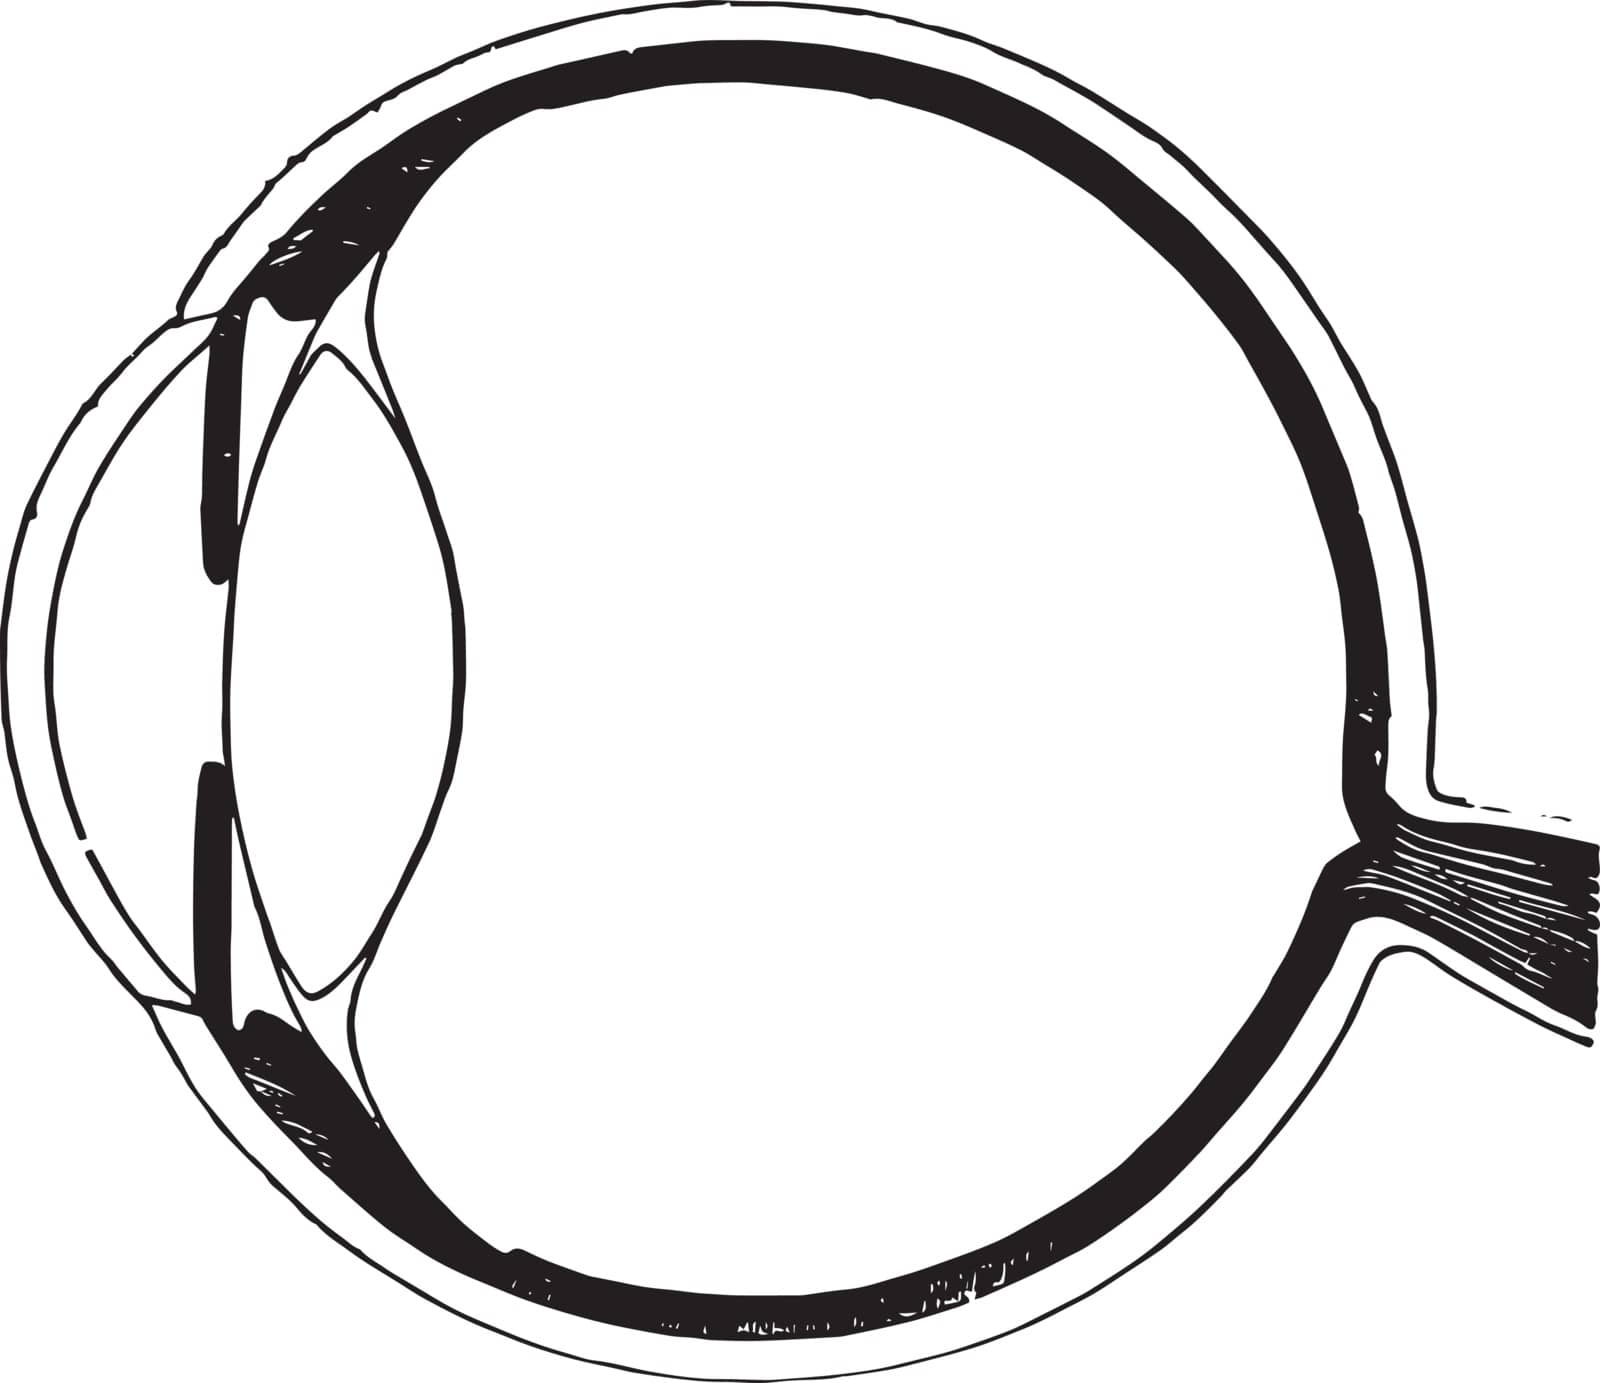 This illustration represents Vertical Section of the Pupil, vintage line drawing or engraving illustration.